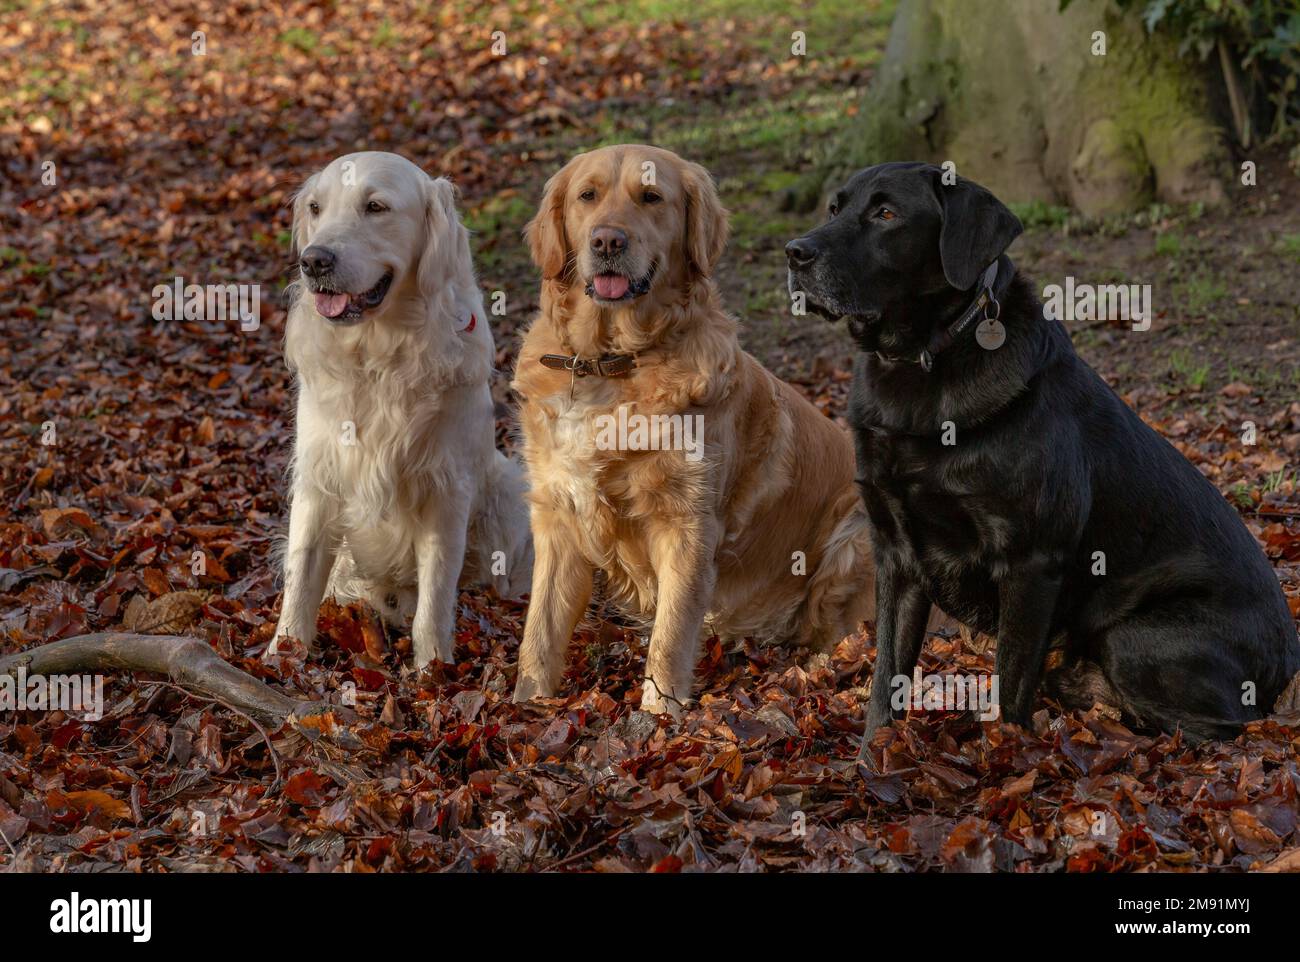 Two Golden Retrievers (one pale, one golden) sitting with a Black Labrador Retriever. They are surrounded by autumn leaf fall. Stock Photo